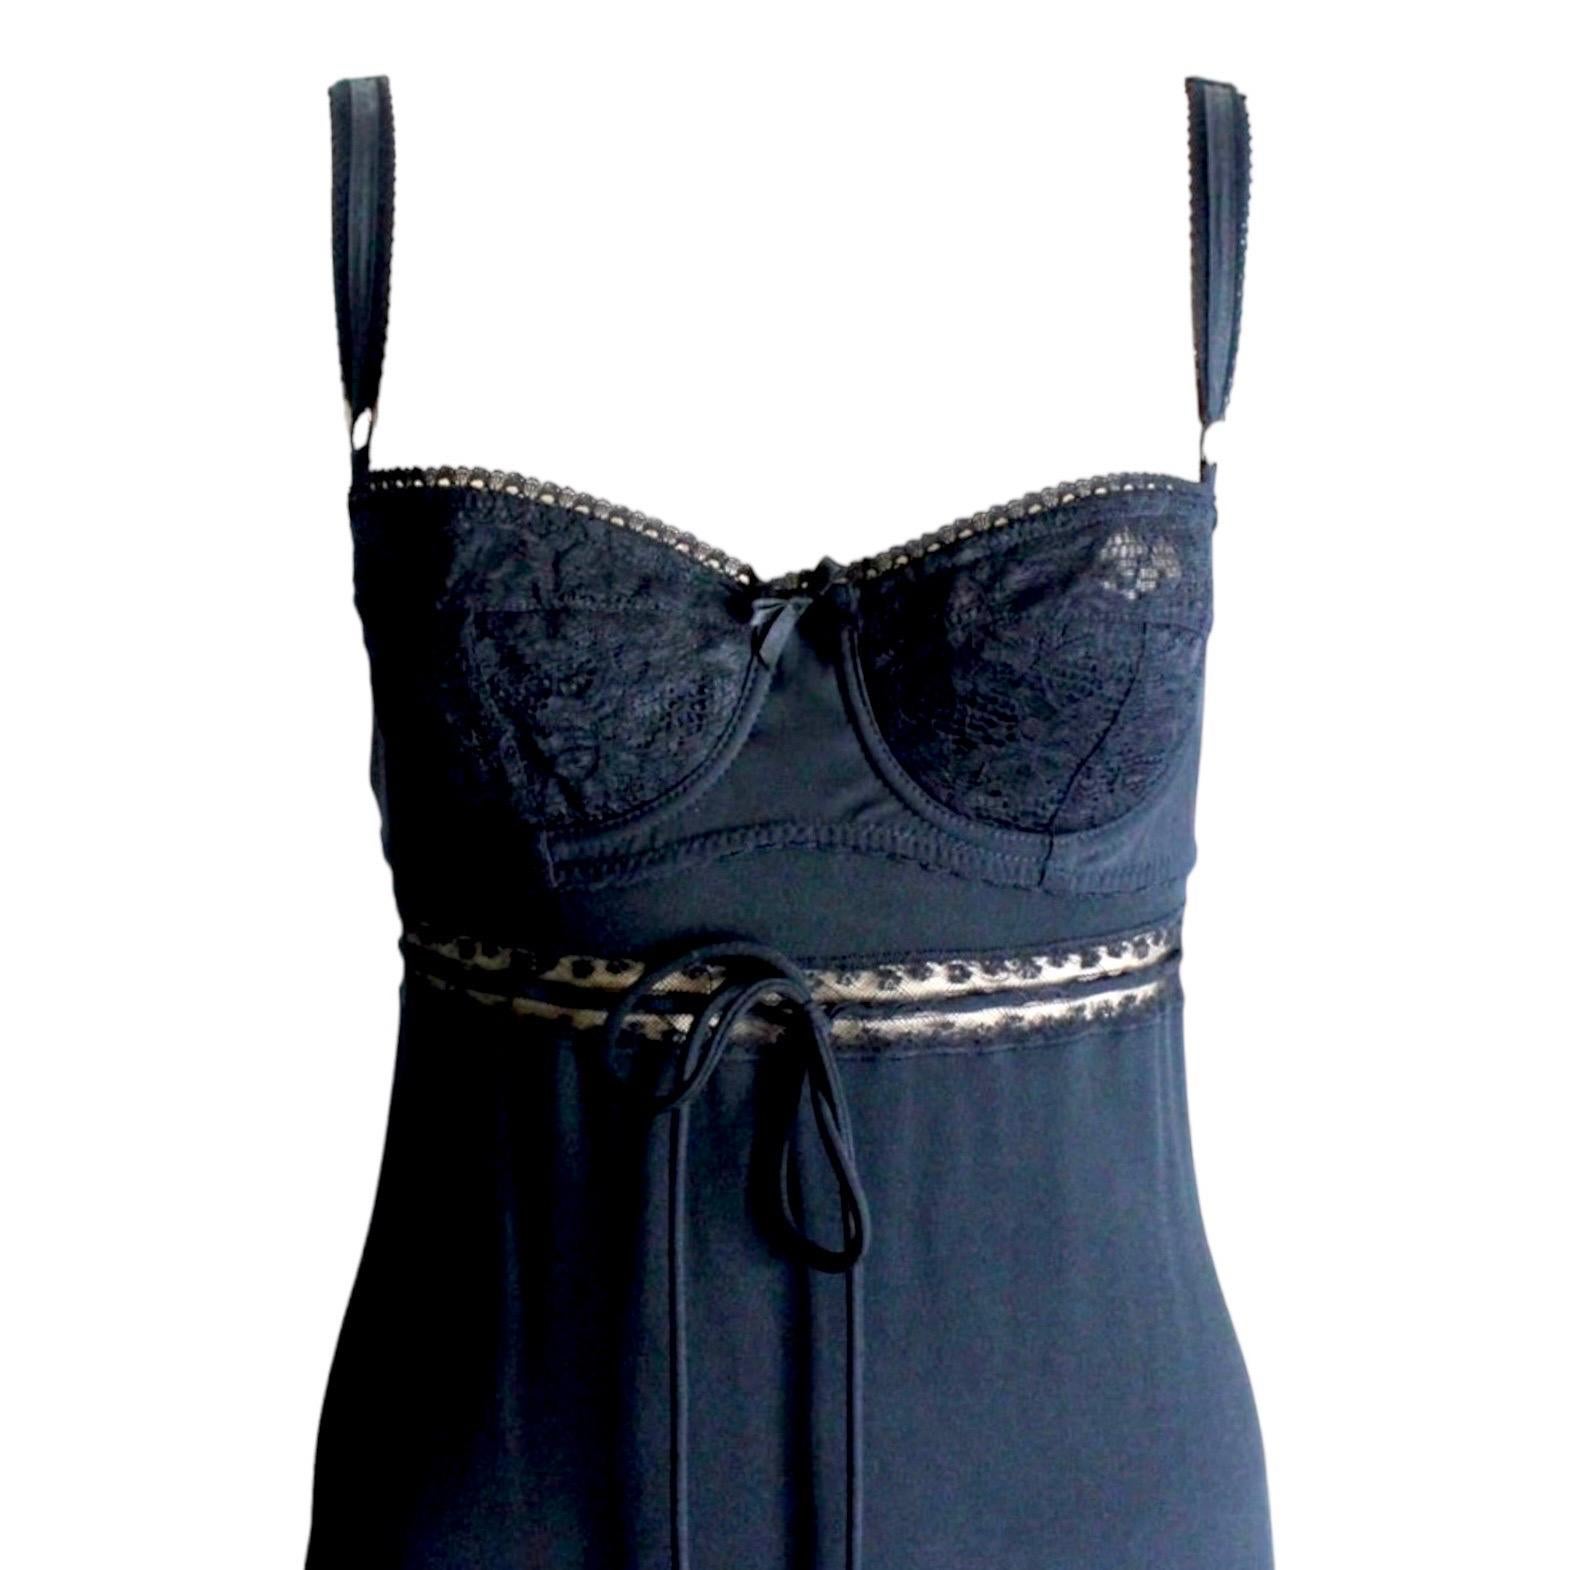     A DOLCE & GABBANA classic signature piece that will last you for years
    From the 1997 collection 
    Made out of a fantastic soft black fabric
    Drawstring detail with lace
Size 42
    Dry Clean Only
    Made in Italy
Please refer to AD